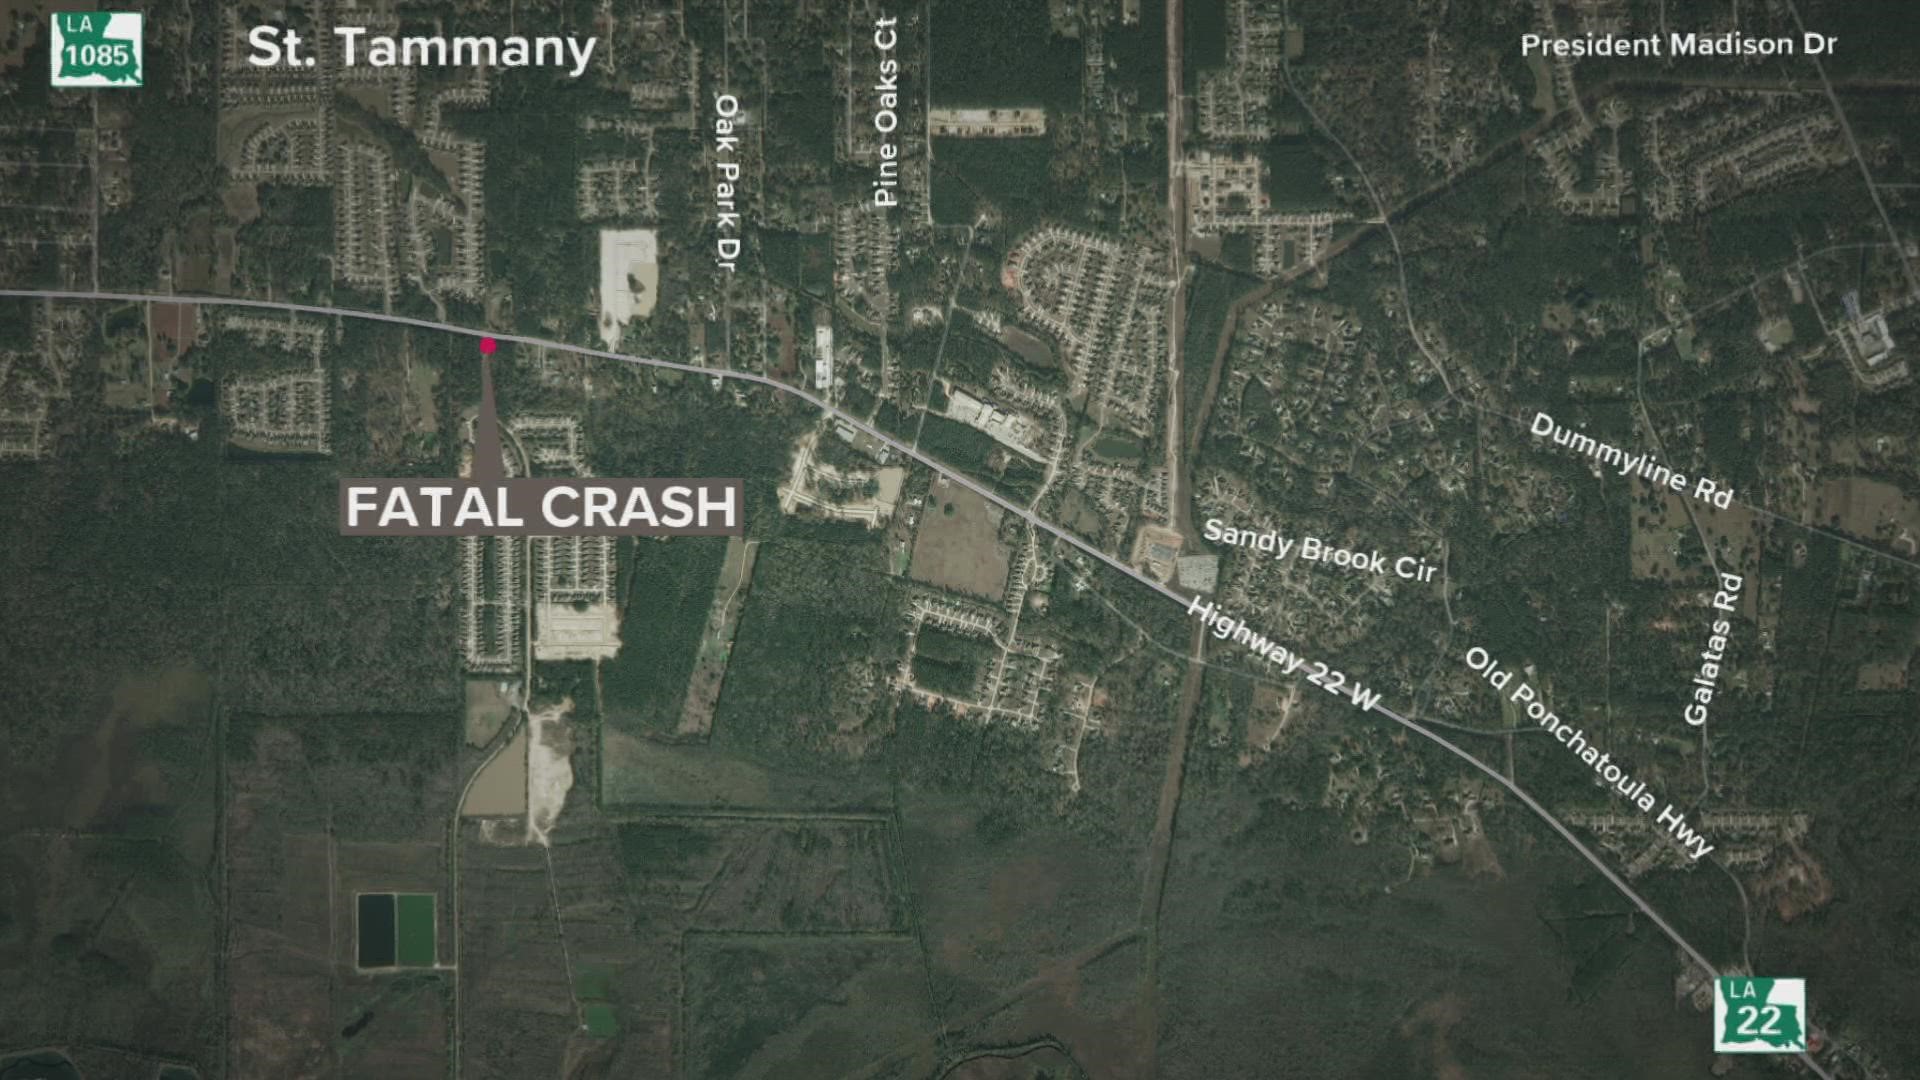 All four of the victims were 16. Two were killed and two were hospitalized after the crash.